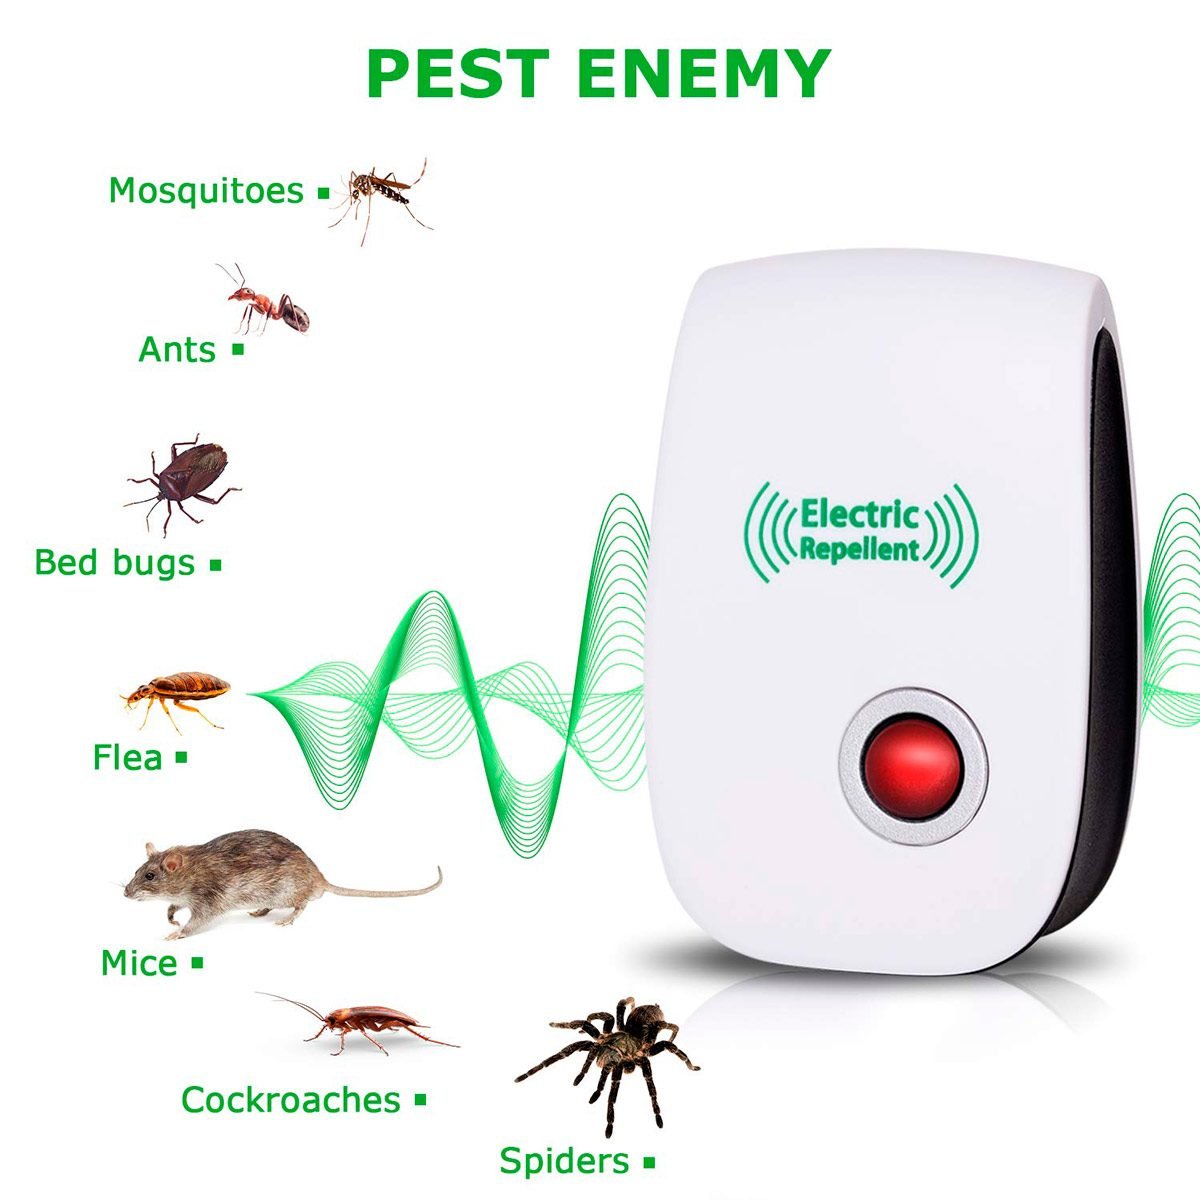 Ultrasonic Pest Control: Does it Really Work?